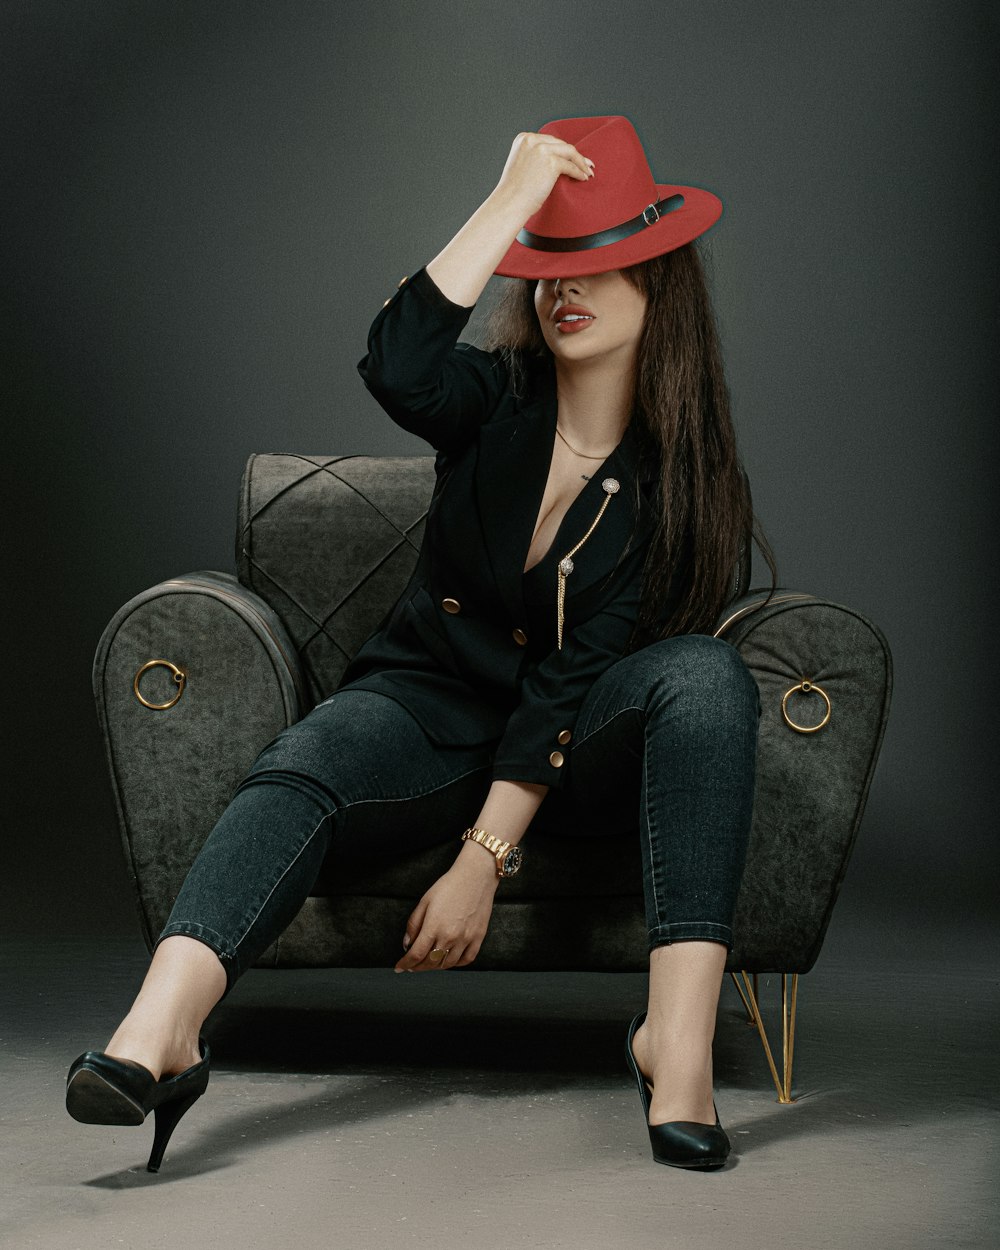 a woman in a red hat sitting on a chair